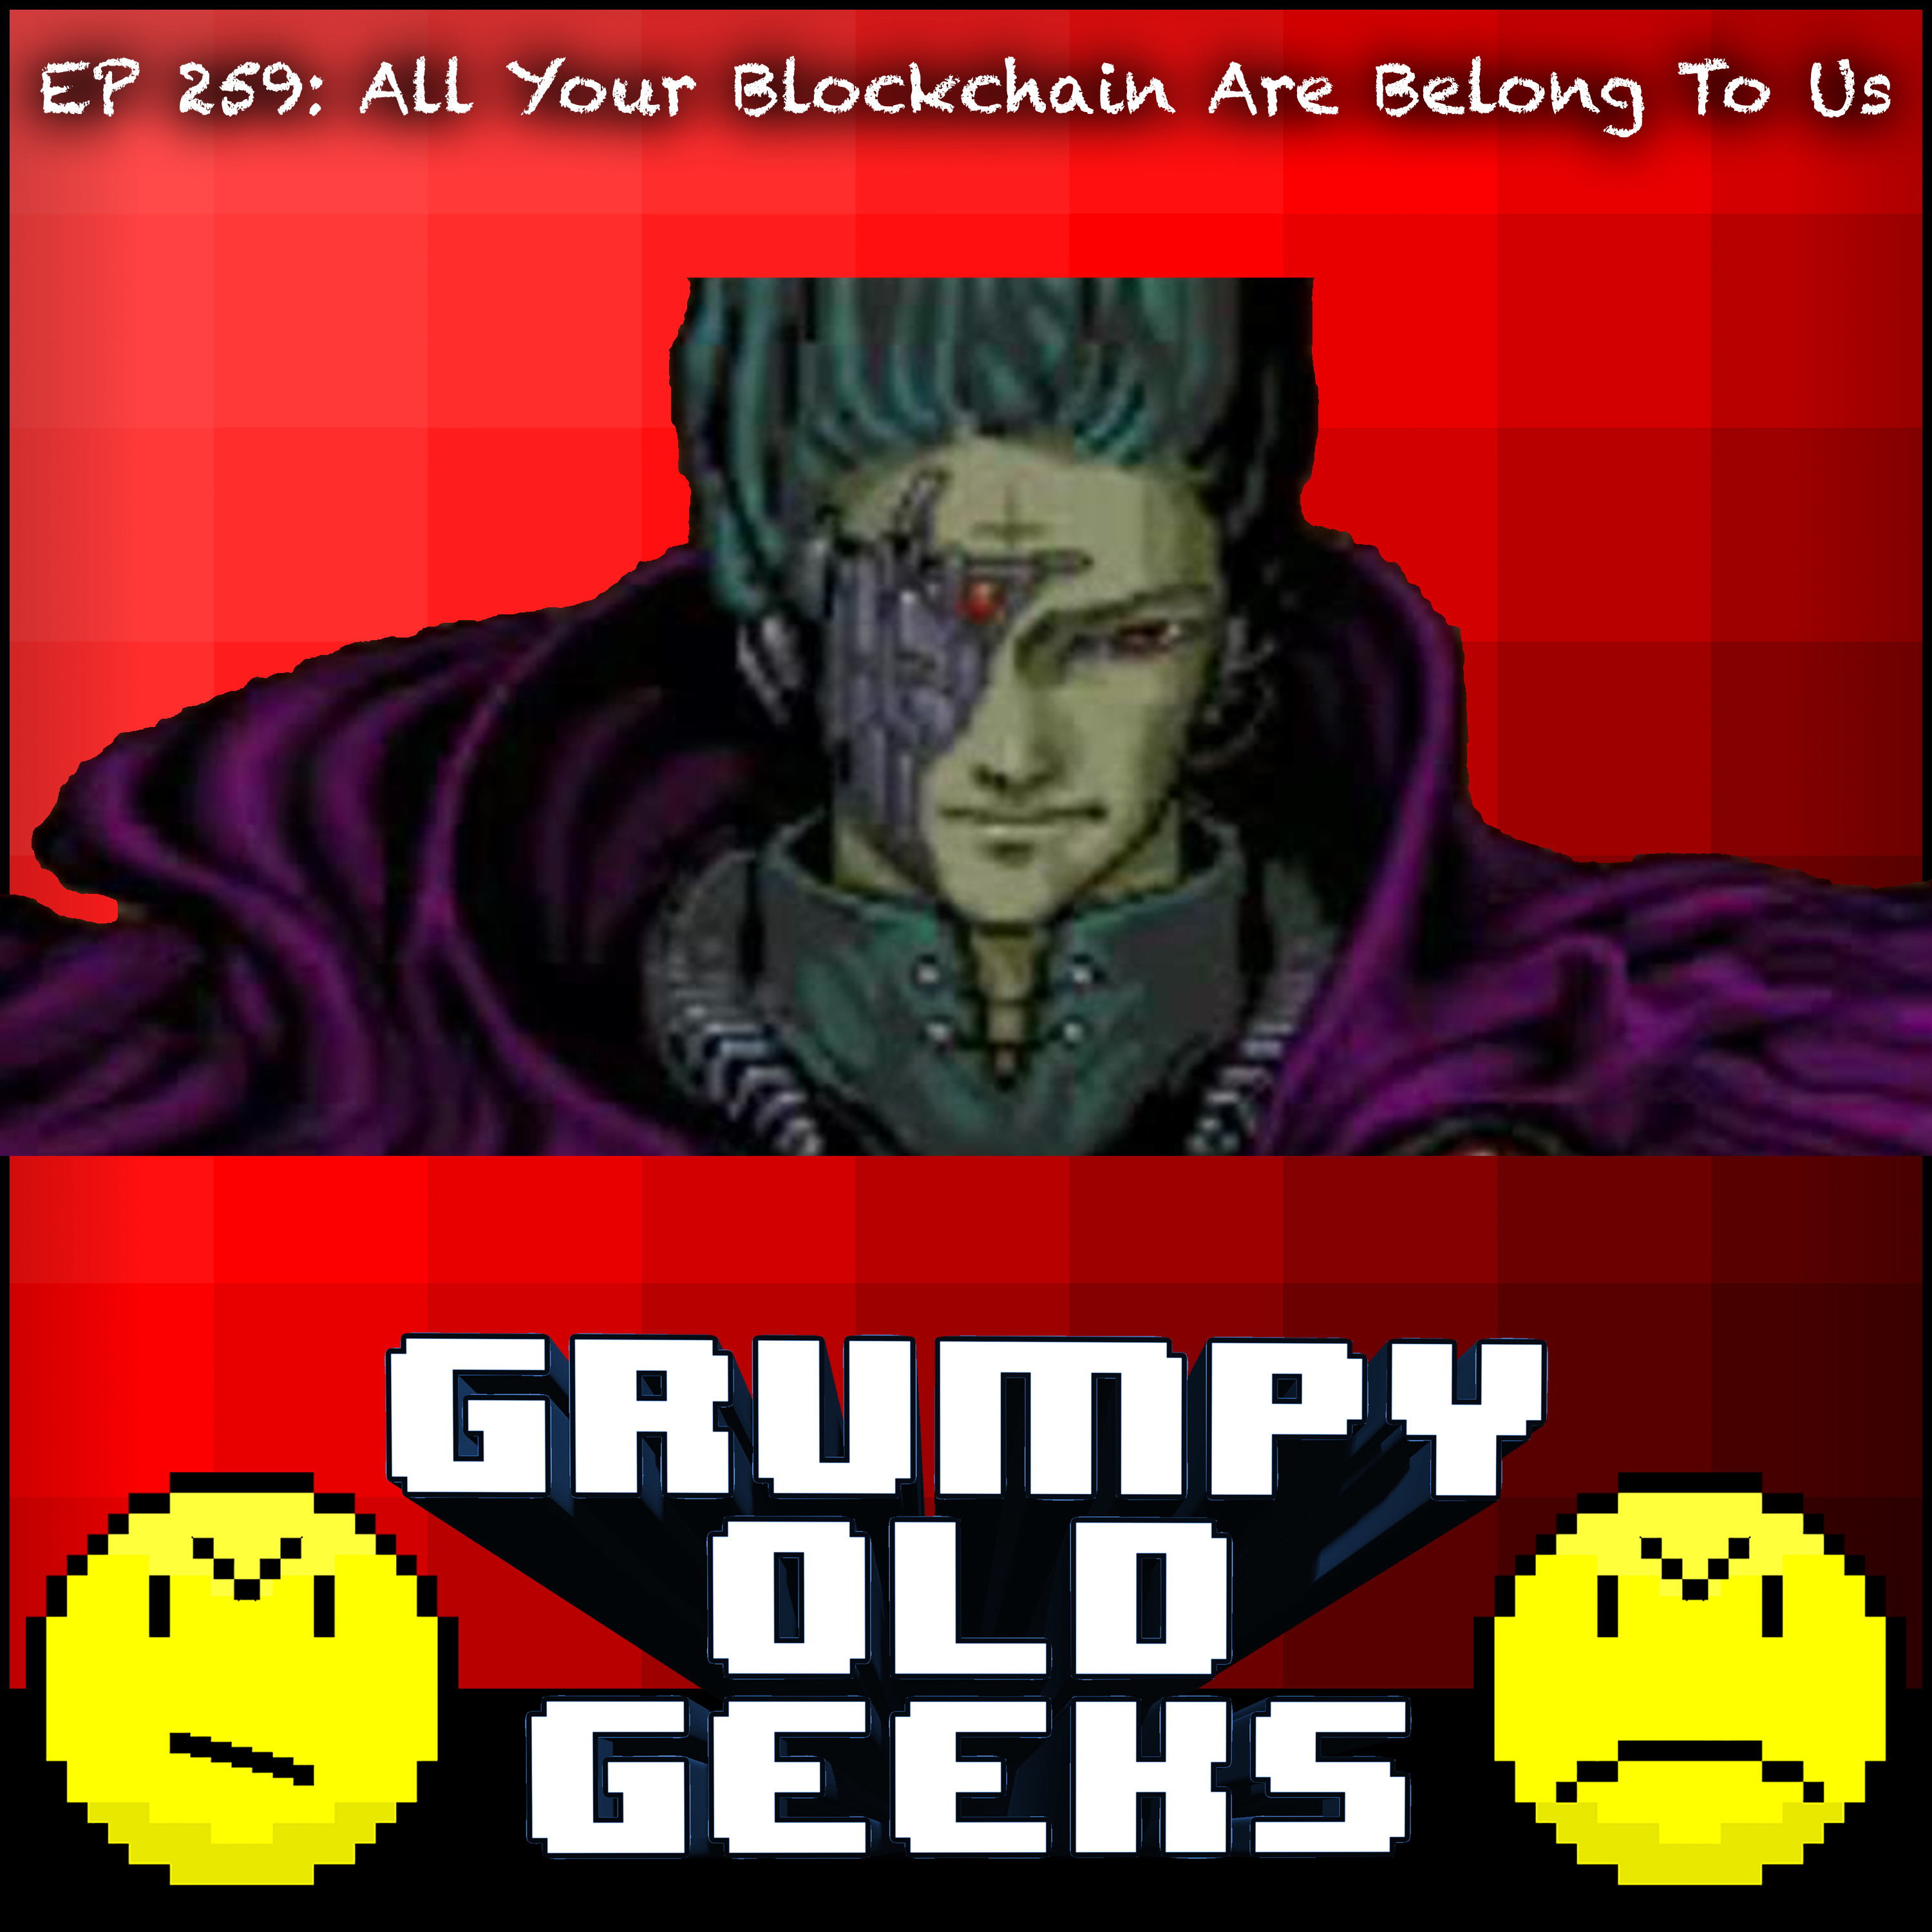 259: All Your Blockchain Are Belong To Us